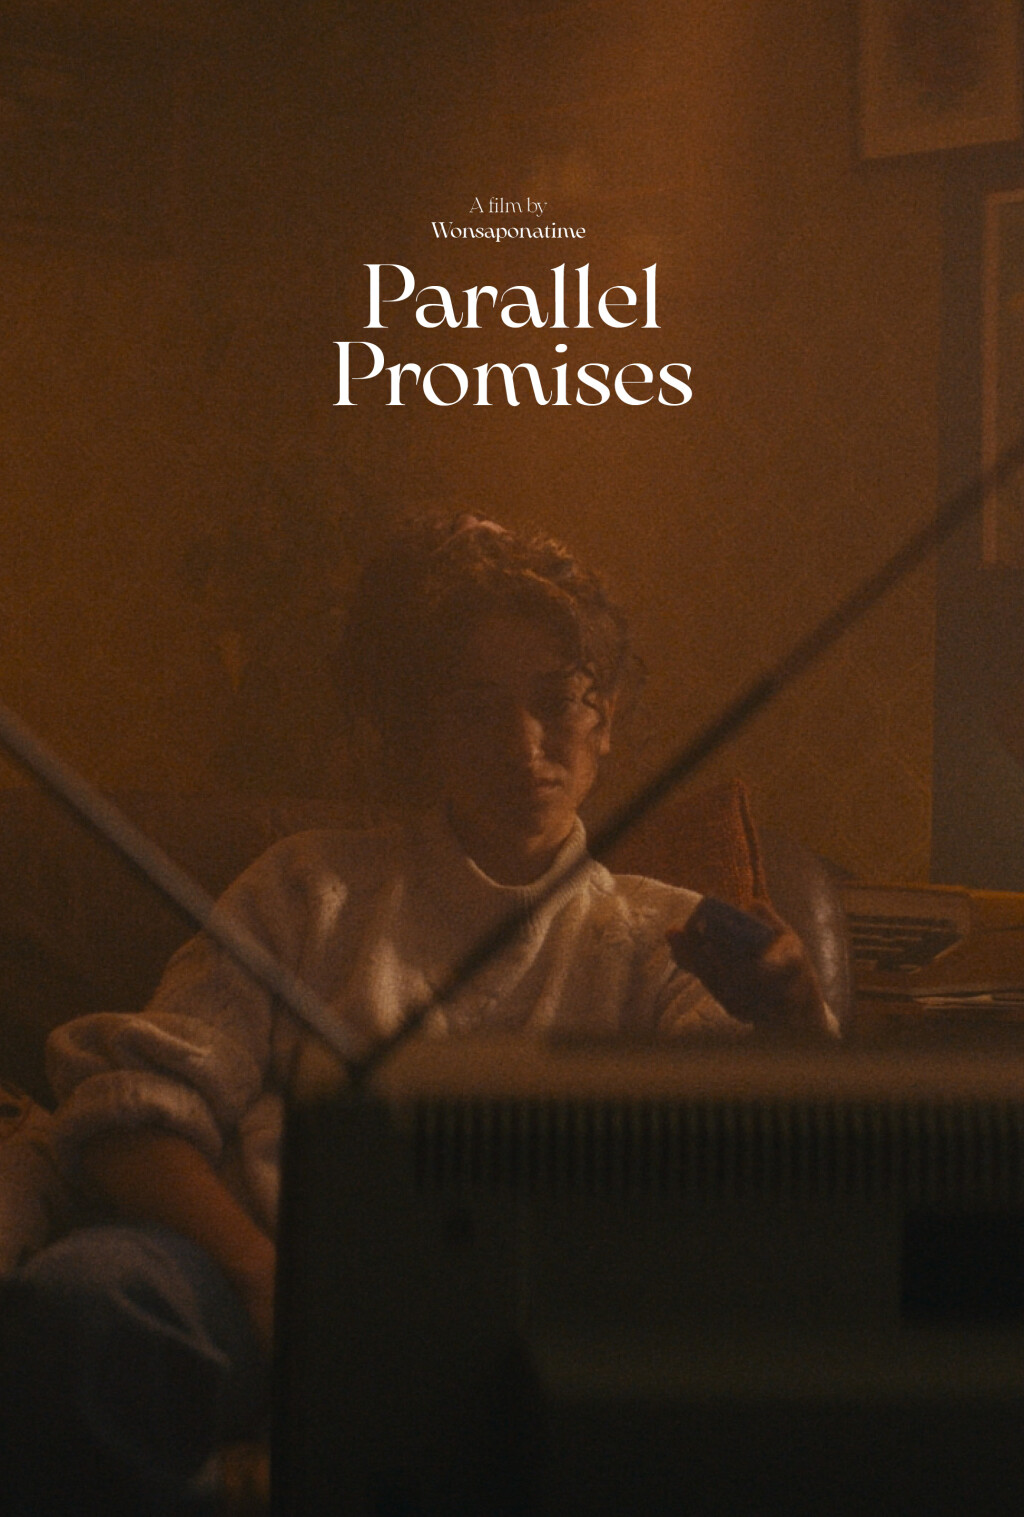 Filmposter for Parallel Promises